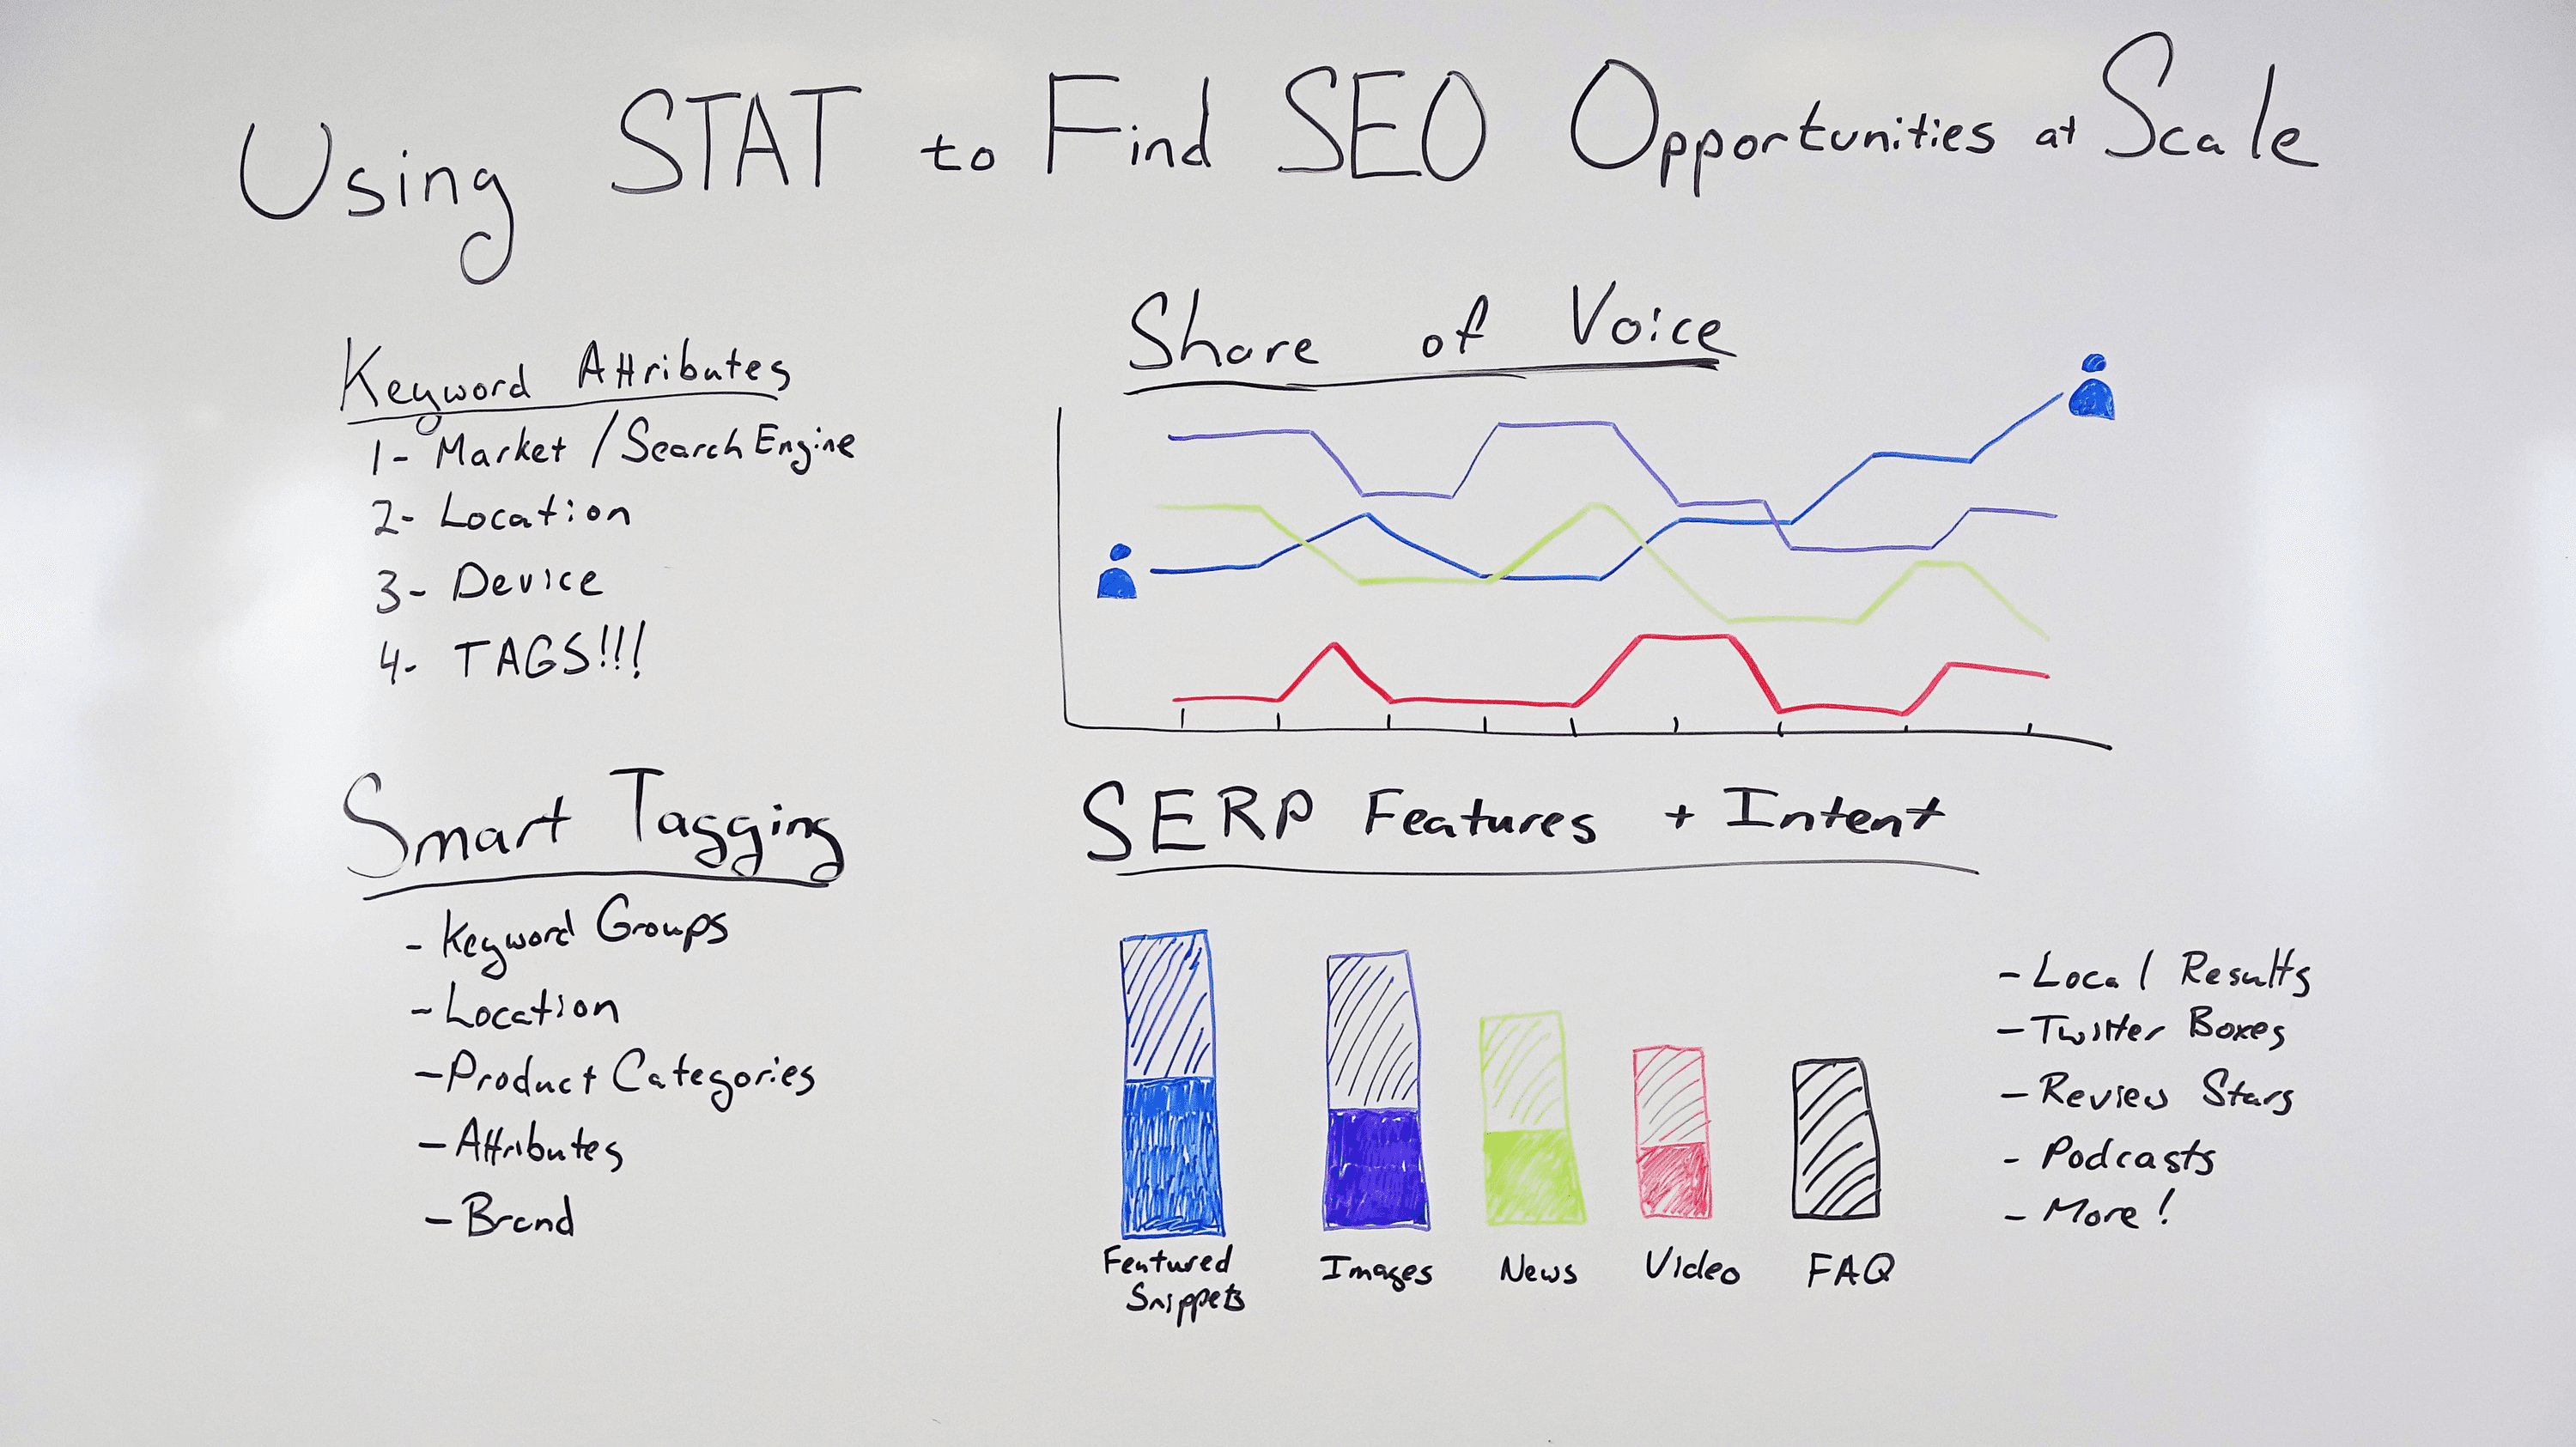 Photo of the whiteboard with examples of how STAT can help you find SEO opportunities on large scales.